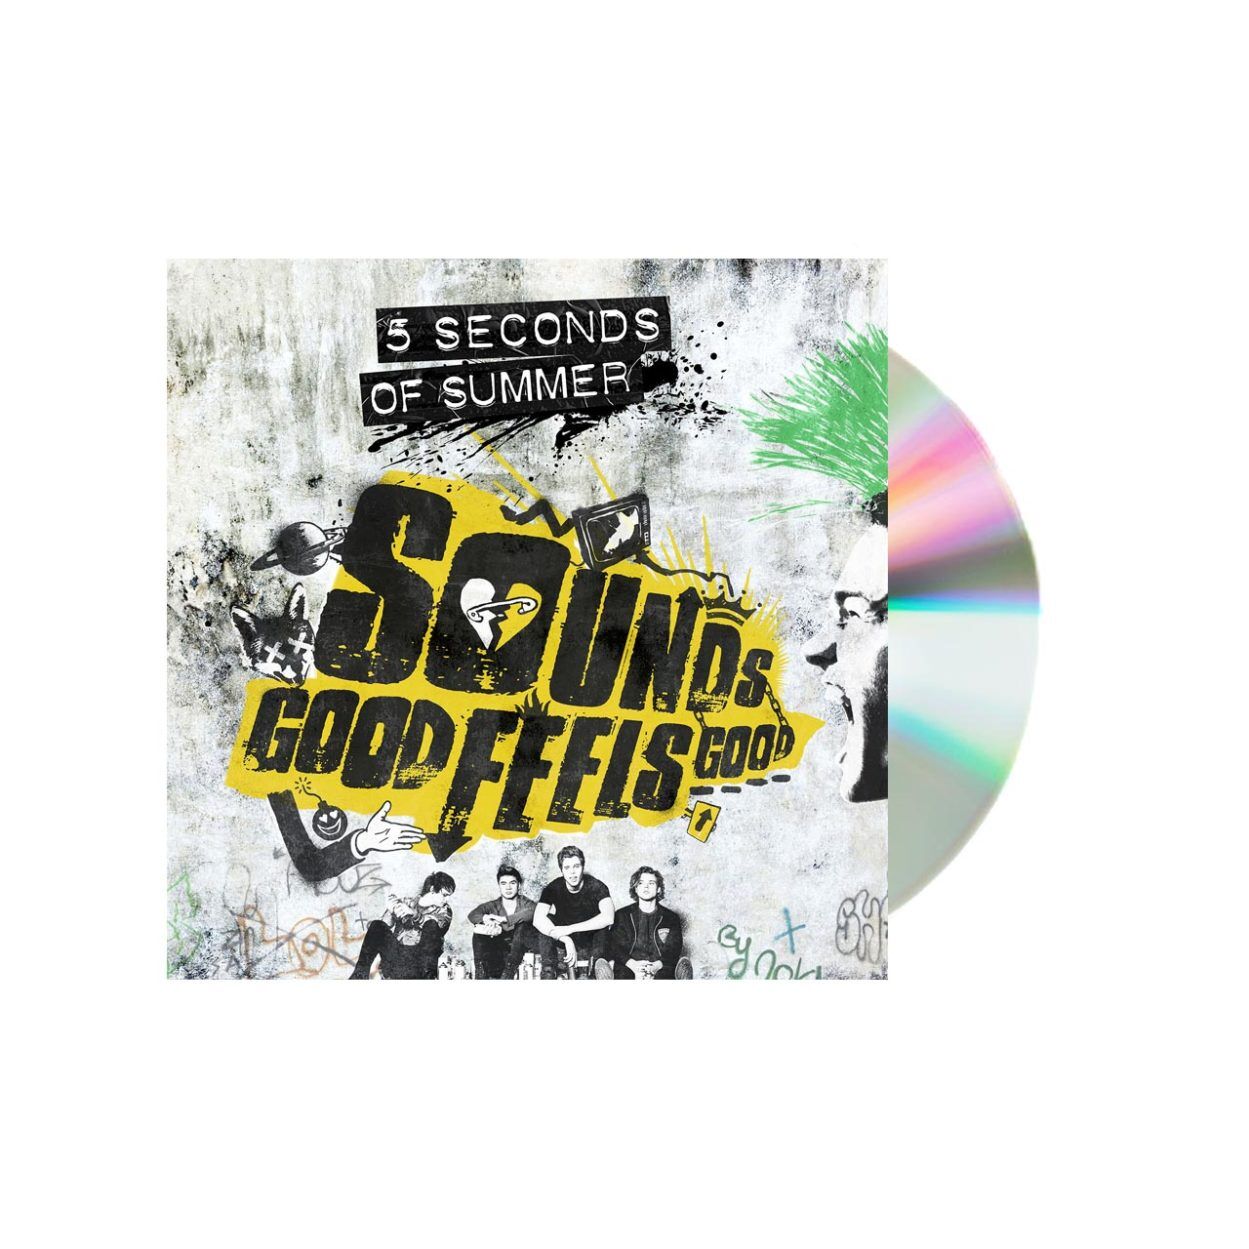 5 Seconds of summer sounds good feels good white cd